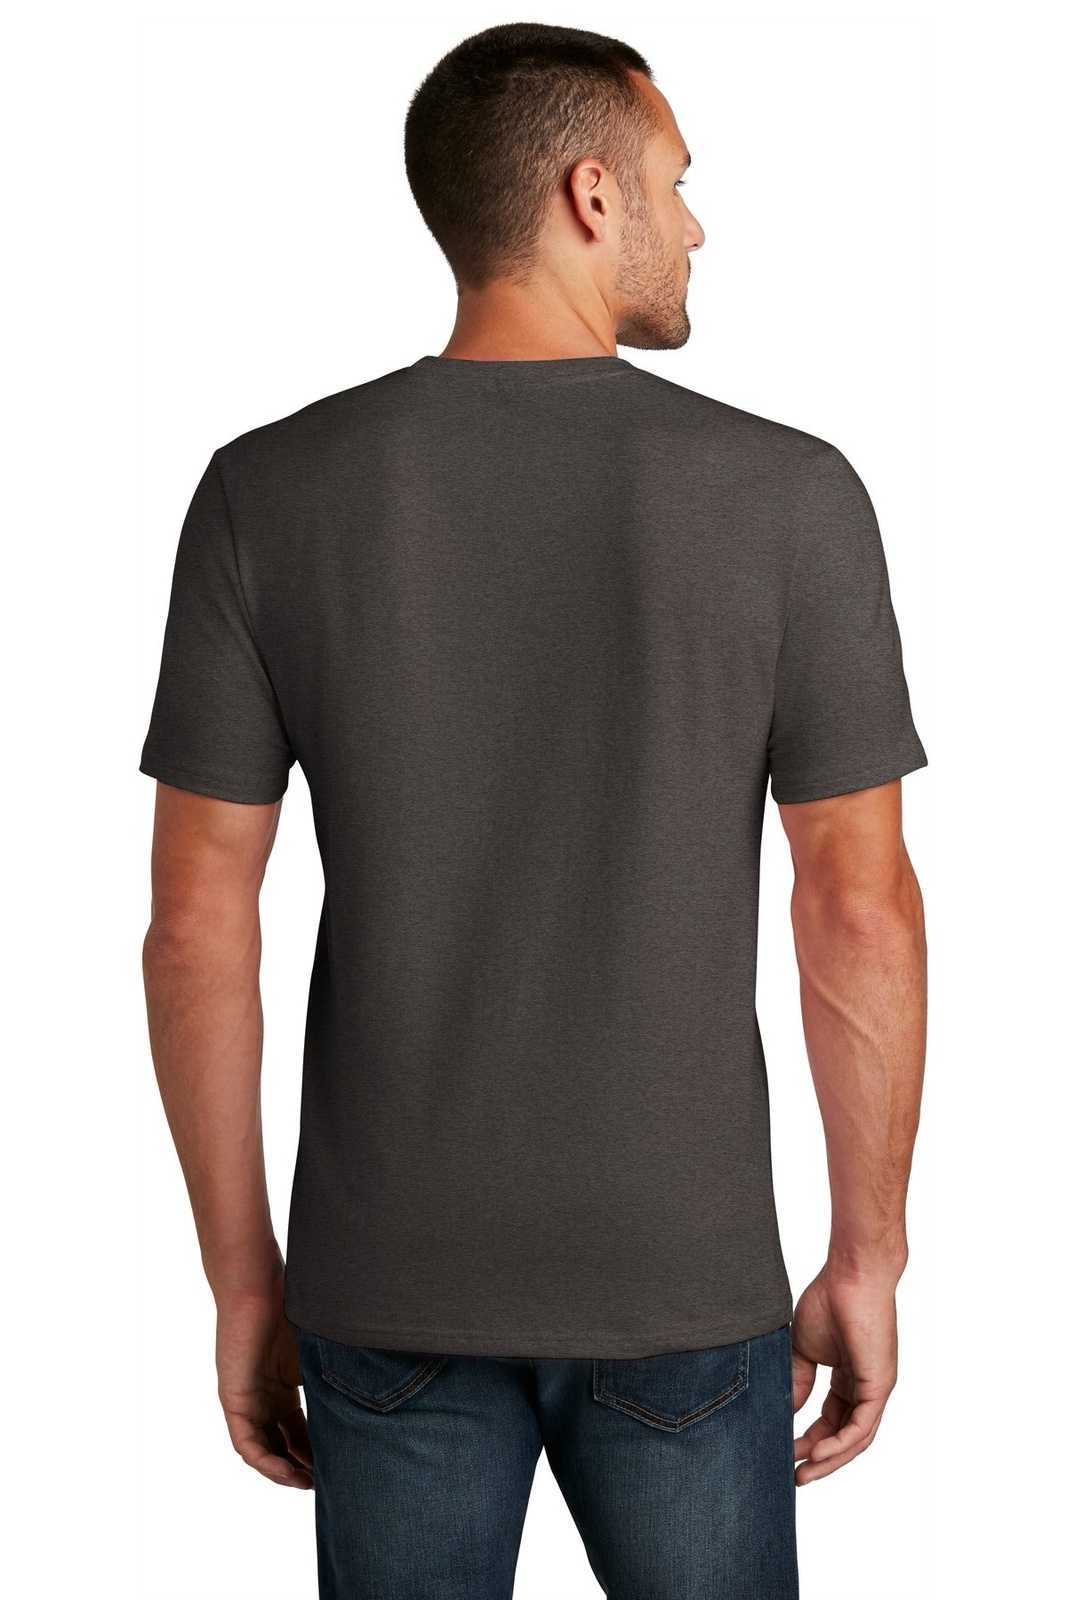 District DT7500 Flex Tee - Heathered Charcoal - HIT a Double - 1